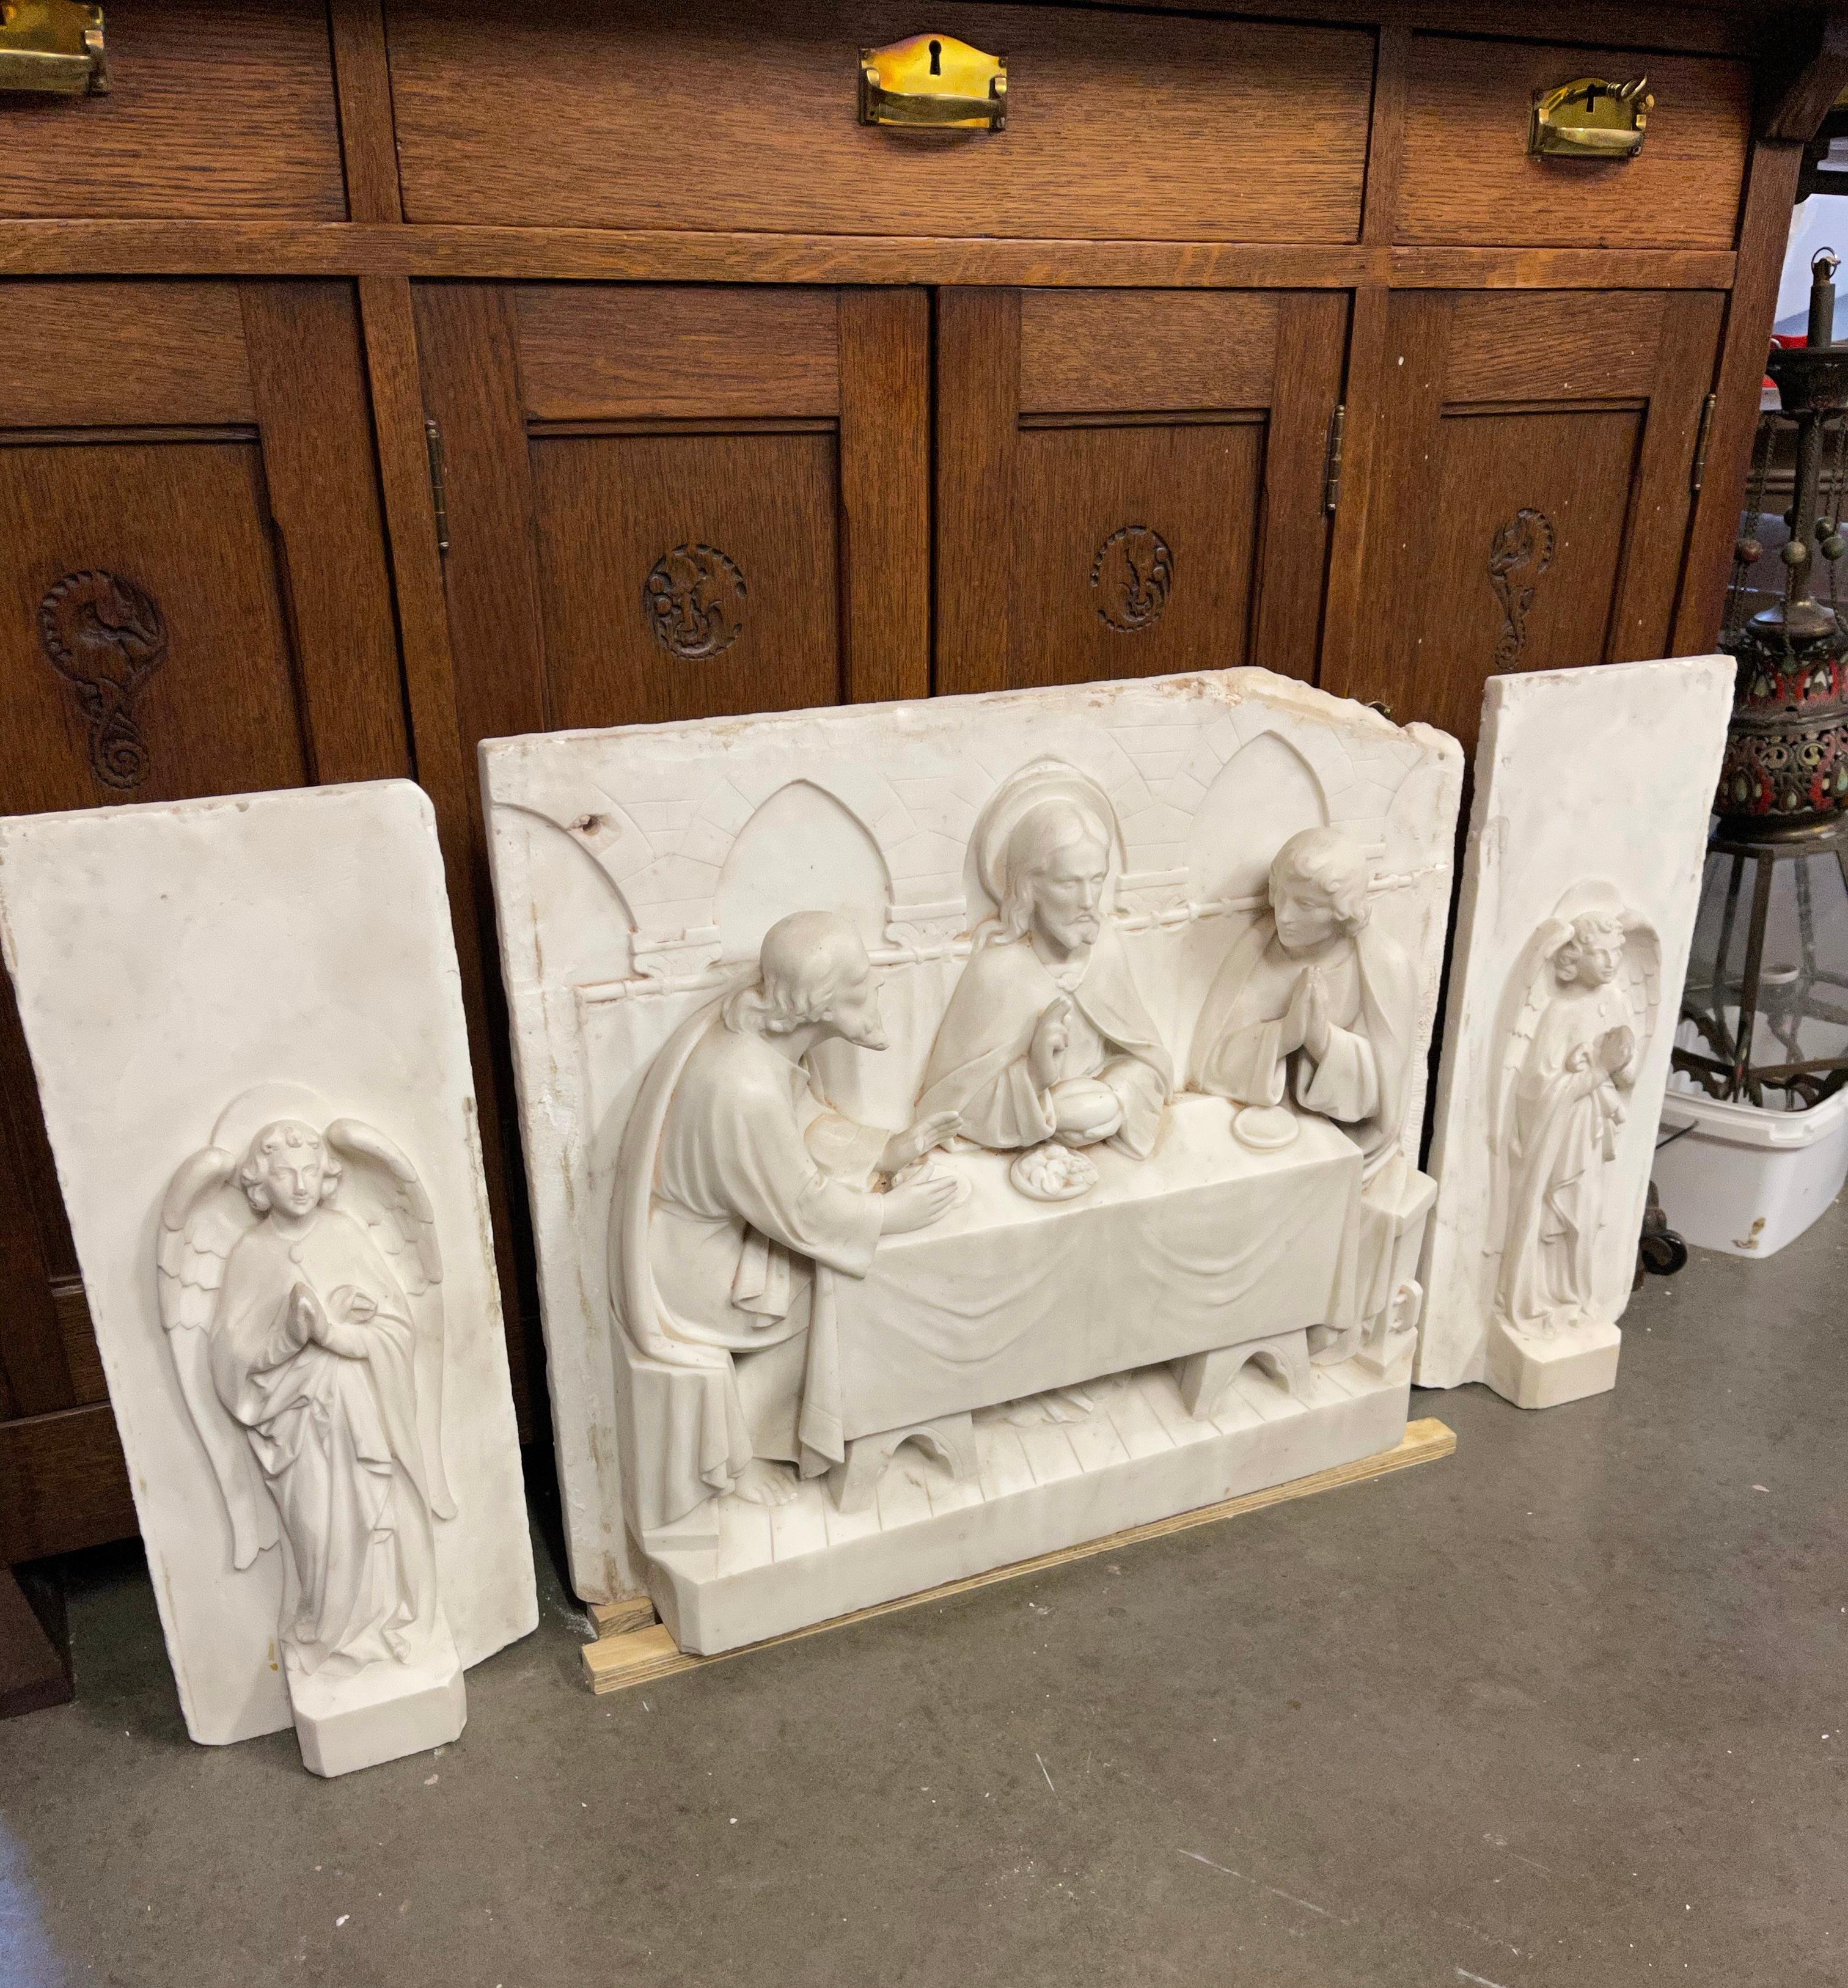 Stunning and all hand carved Gothic Revival from the late 1800s depicting a biblical scene